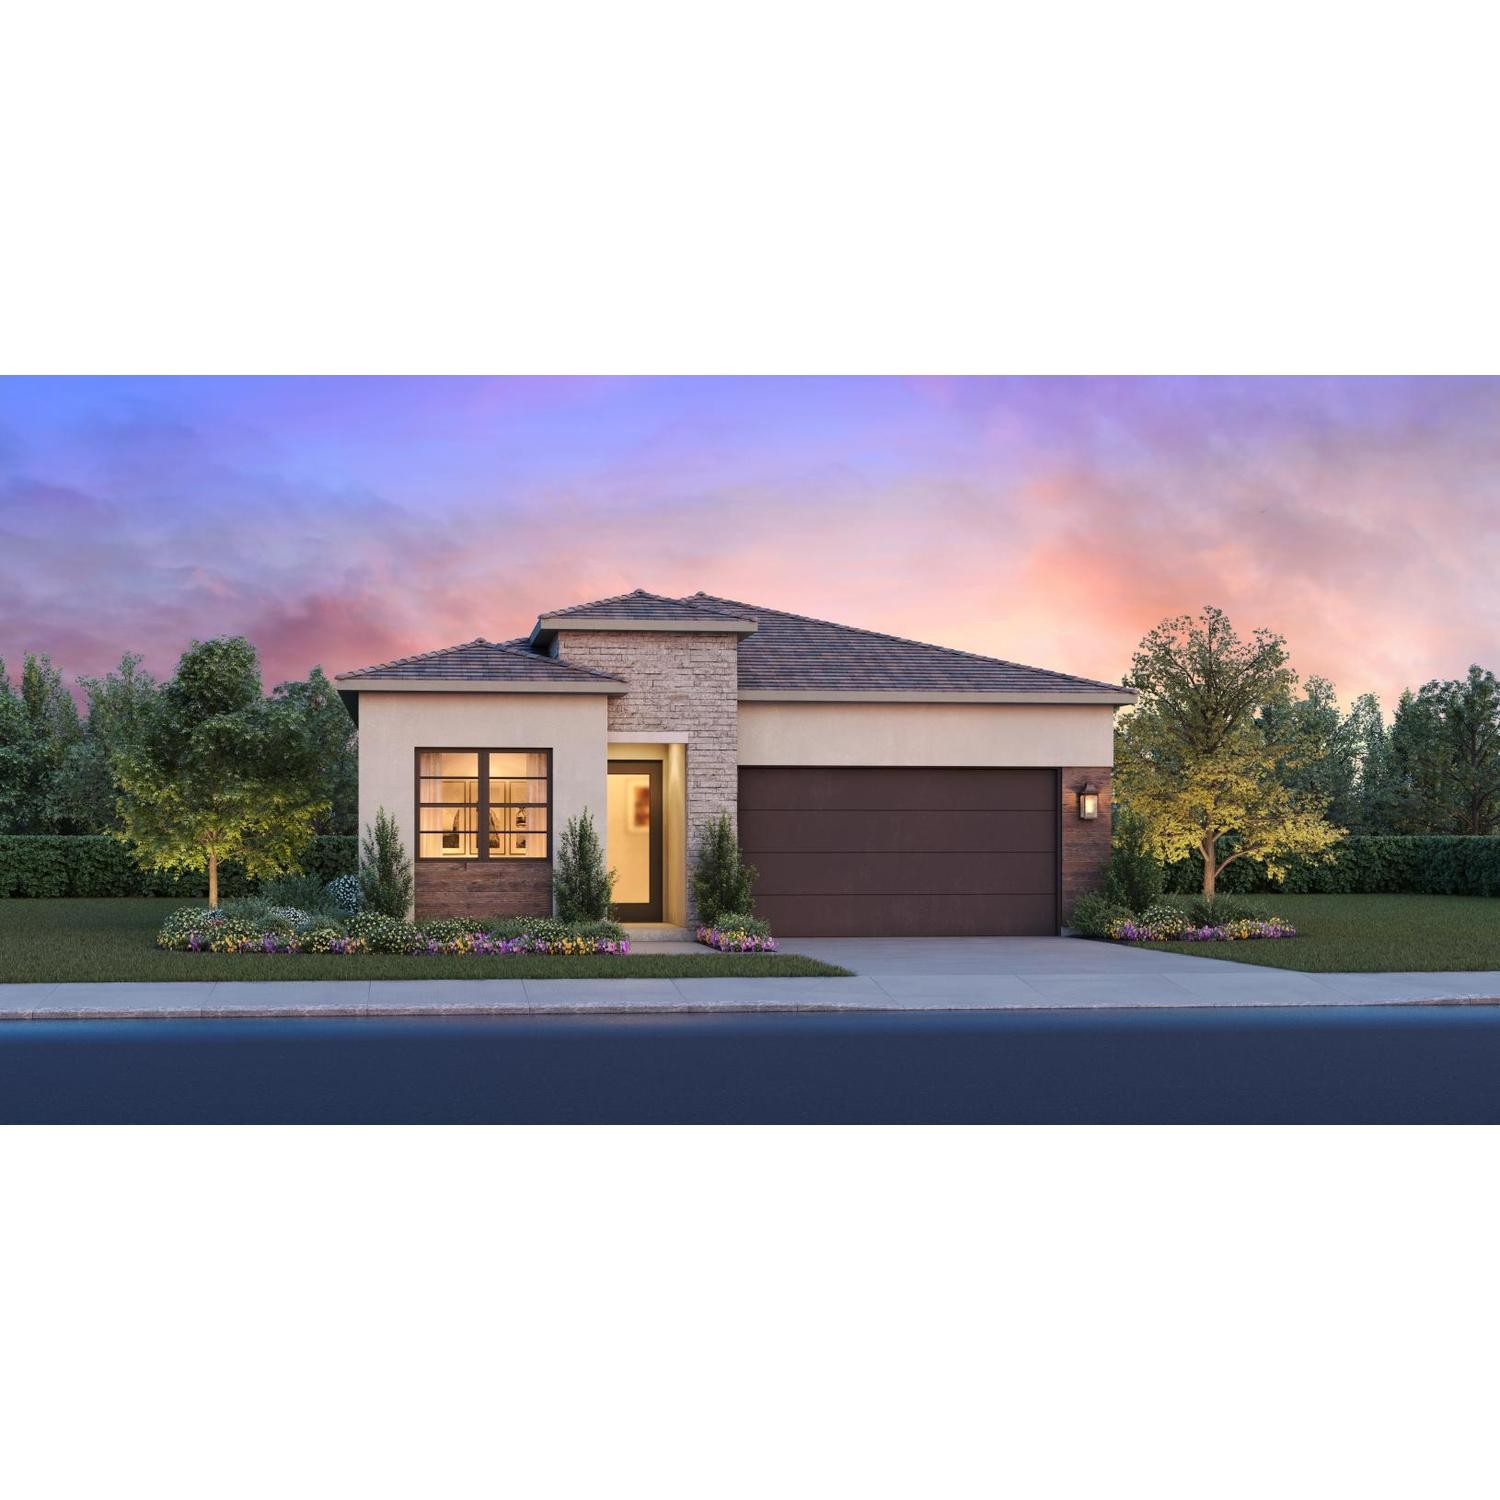 3. Regency At Tracy Lakes - Pinecrest Collection